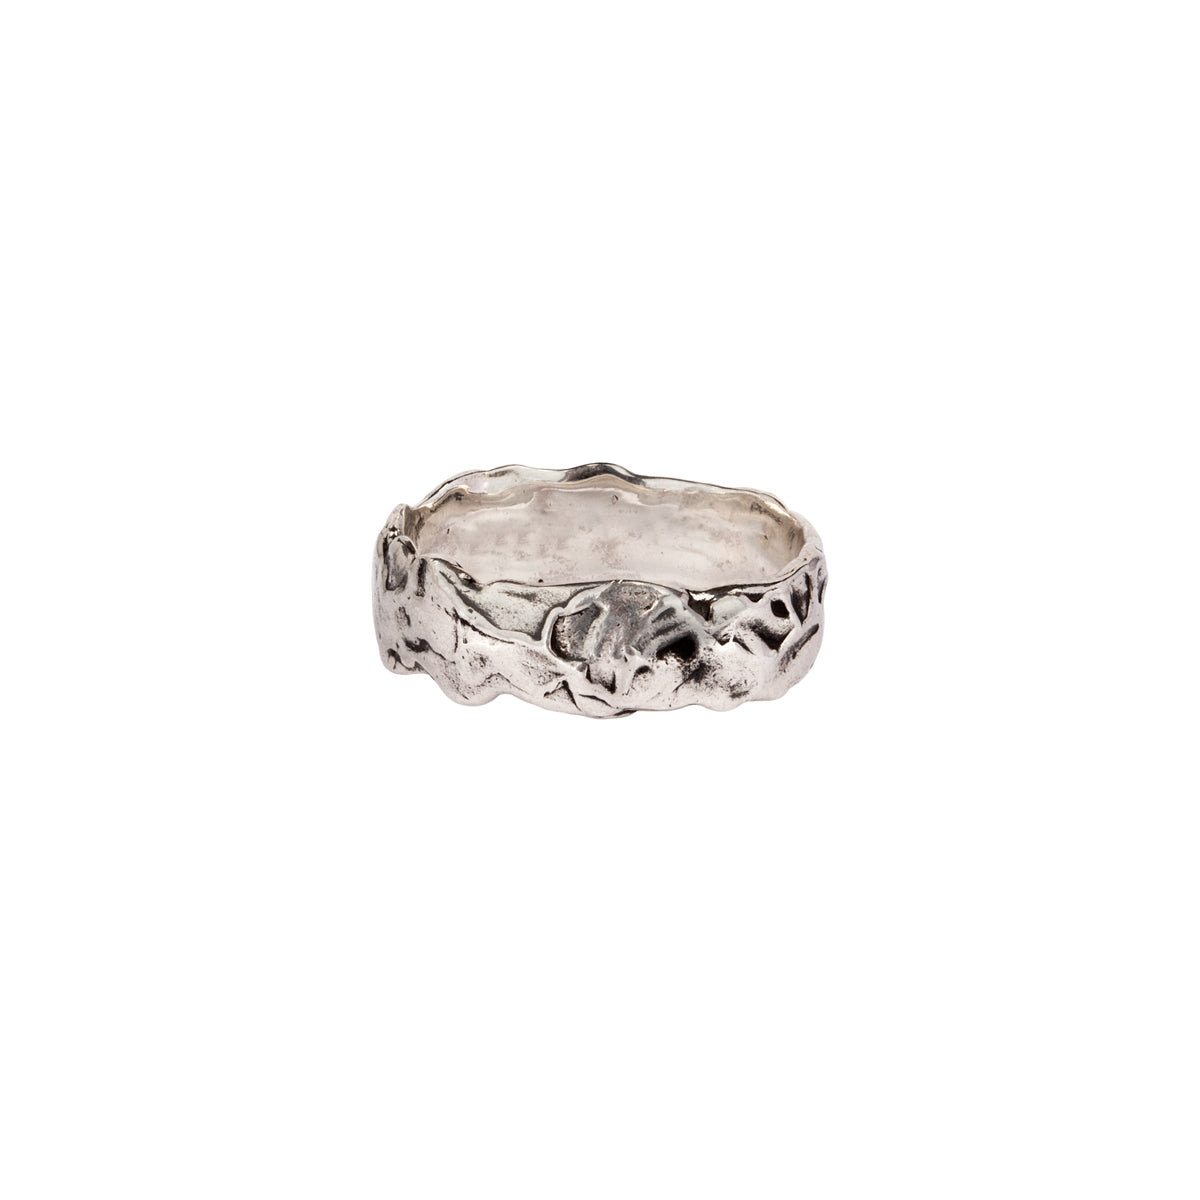 A wide silver band ring uniquely textured by hand